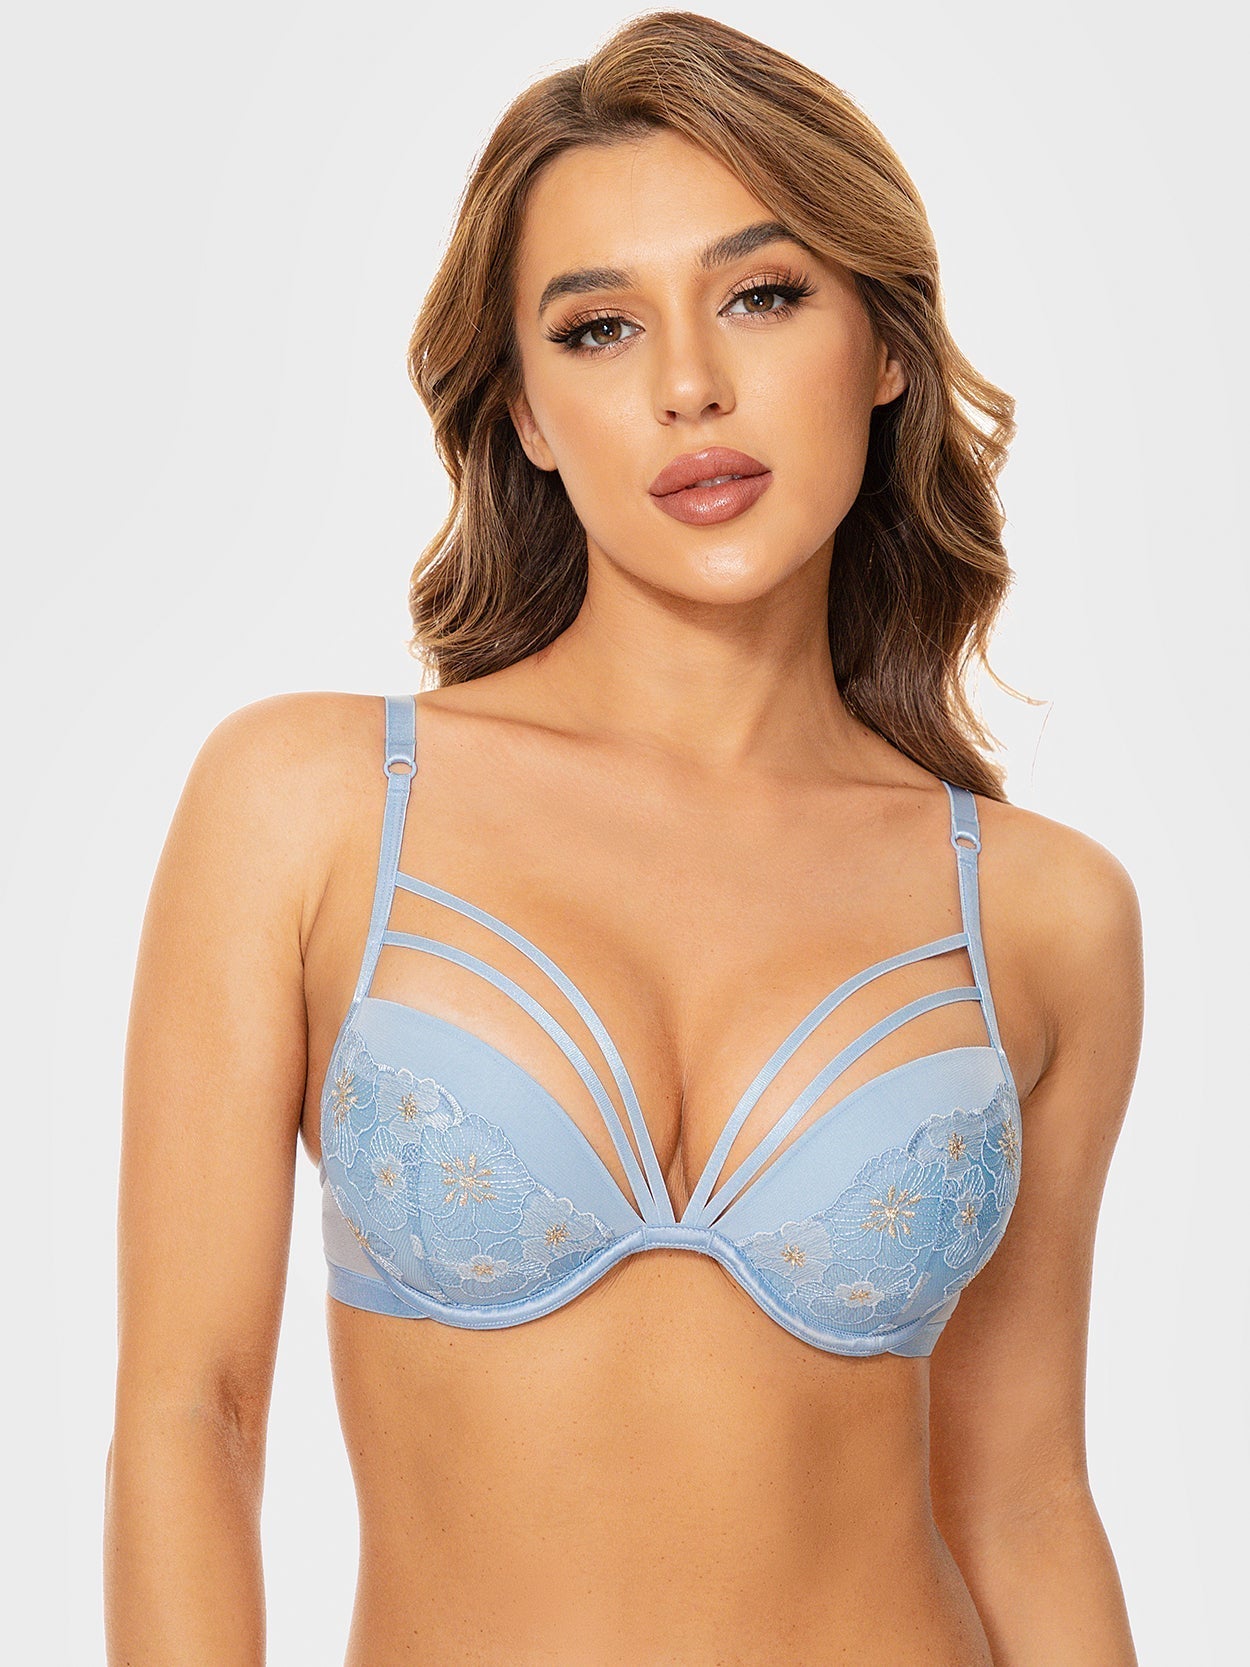 Romantic push-up bra, floral lace, sheer inlay